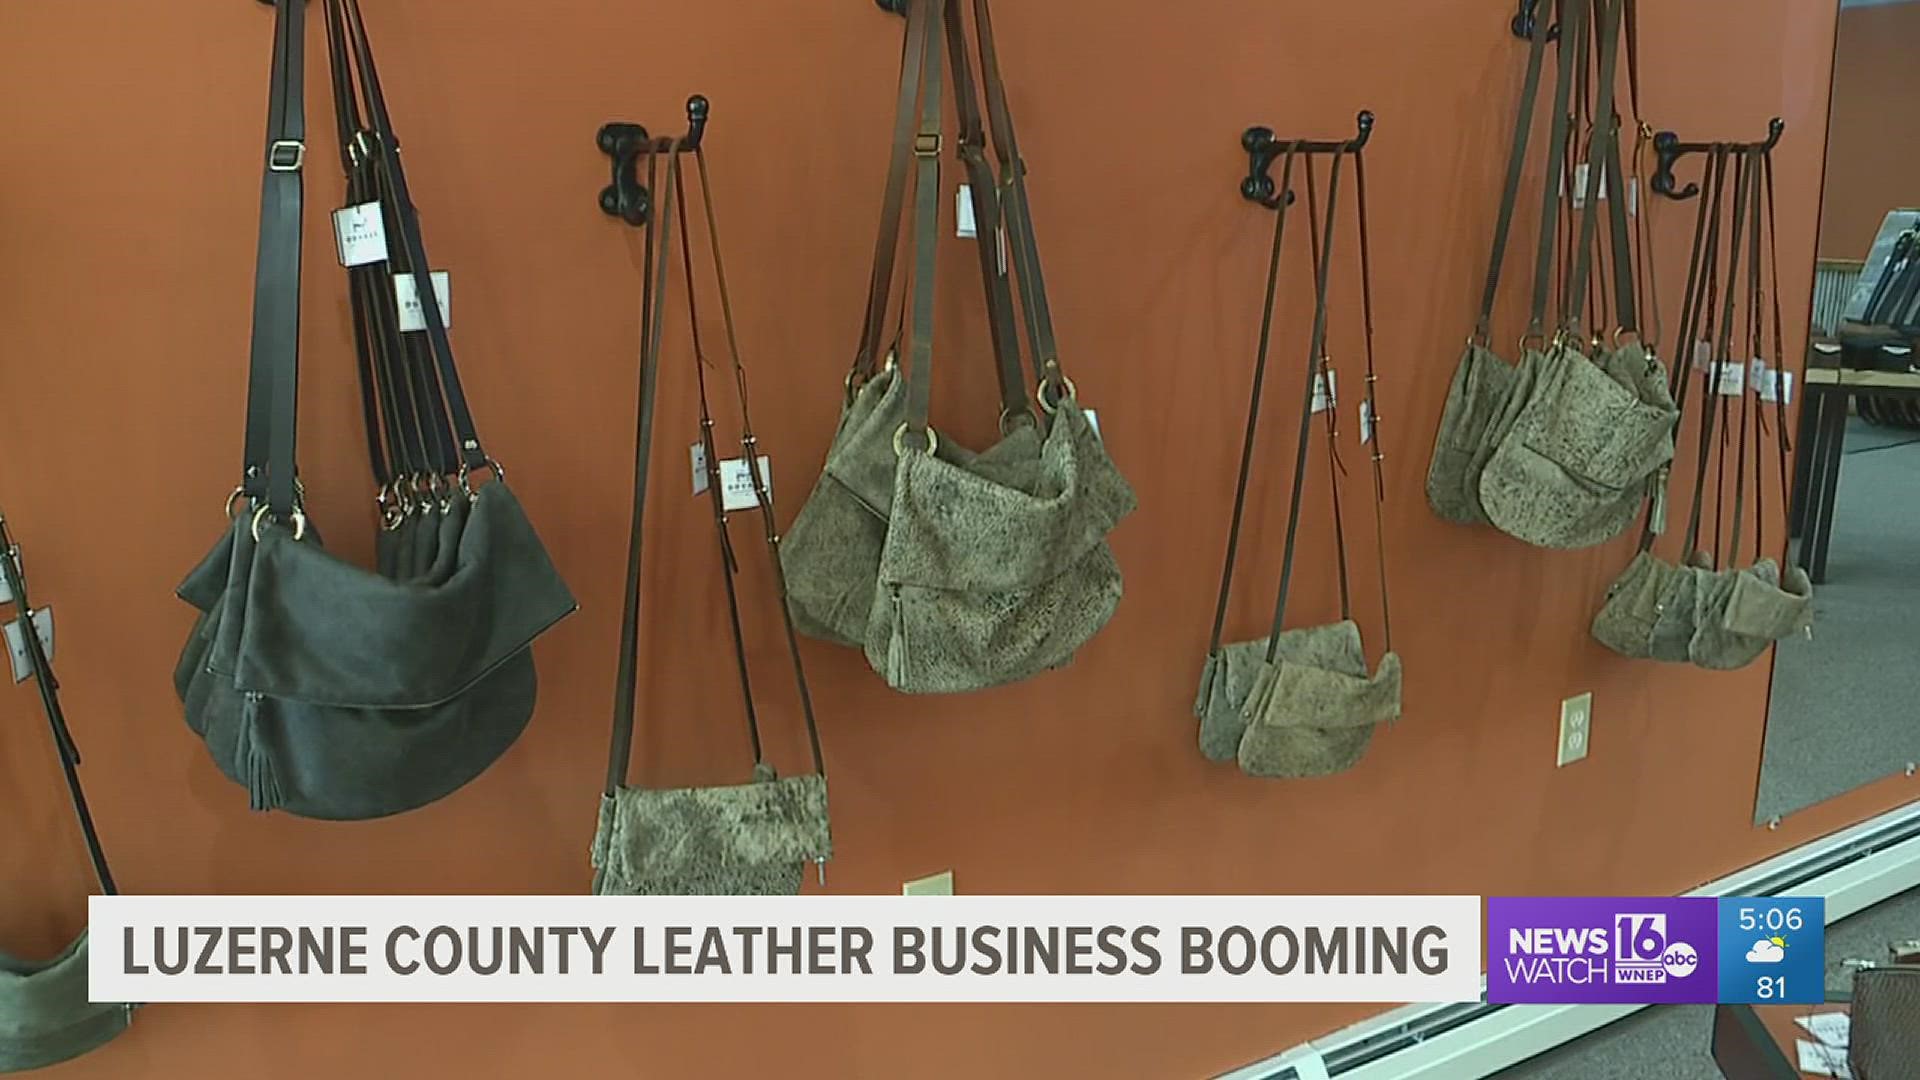 From Kingston to Hanover Township, the local leather artisan business is growing despite the pandemic.